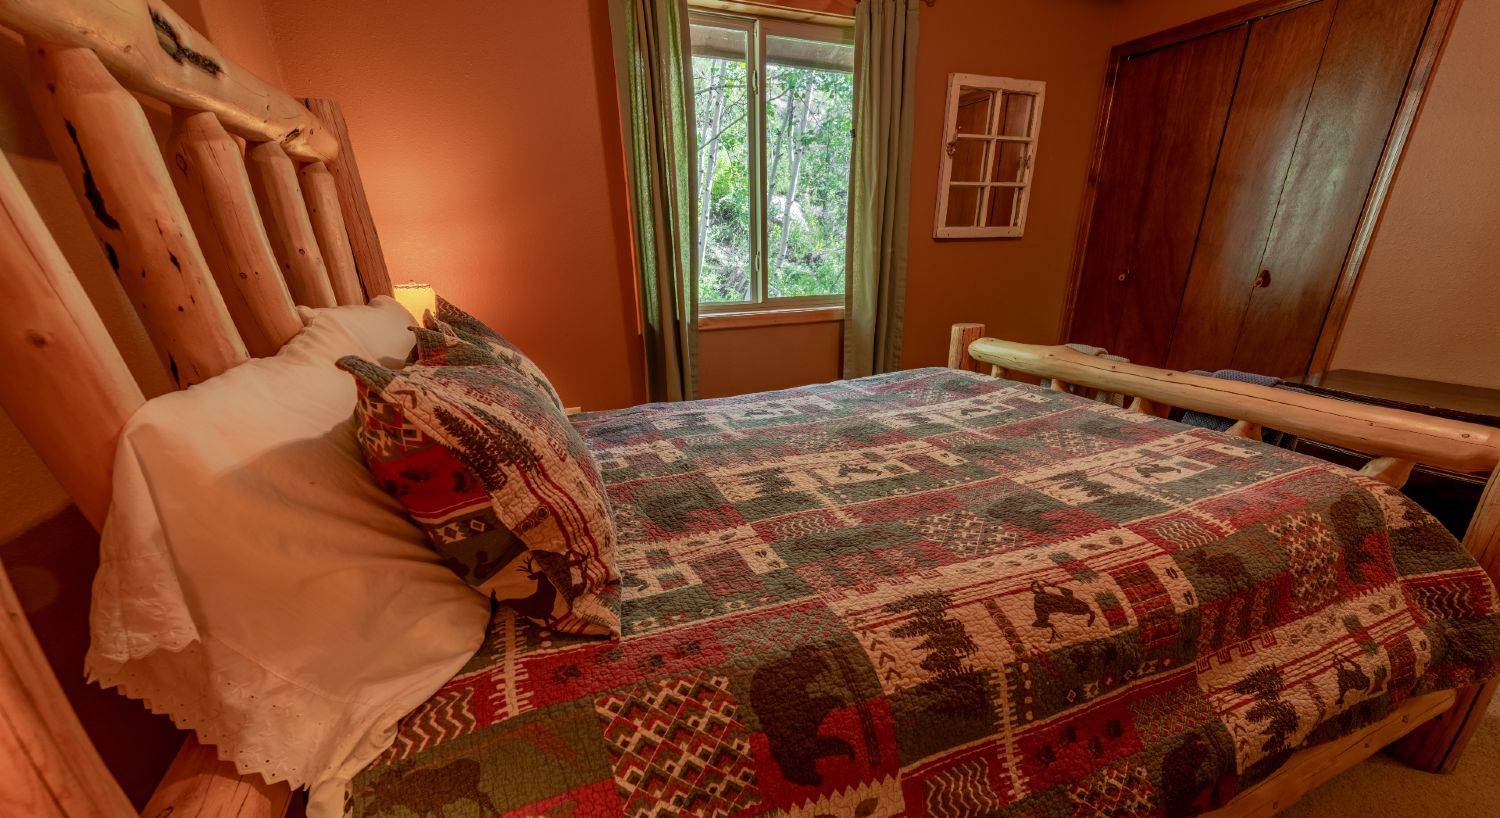 Guest bedroom with a queen size log bed, lodge style quilt, and brown walls.